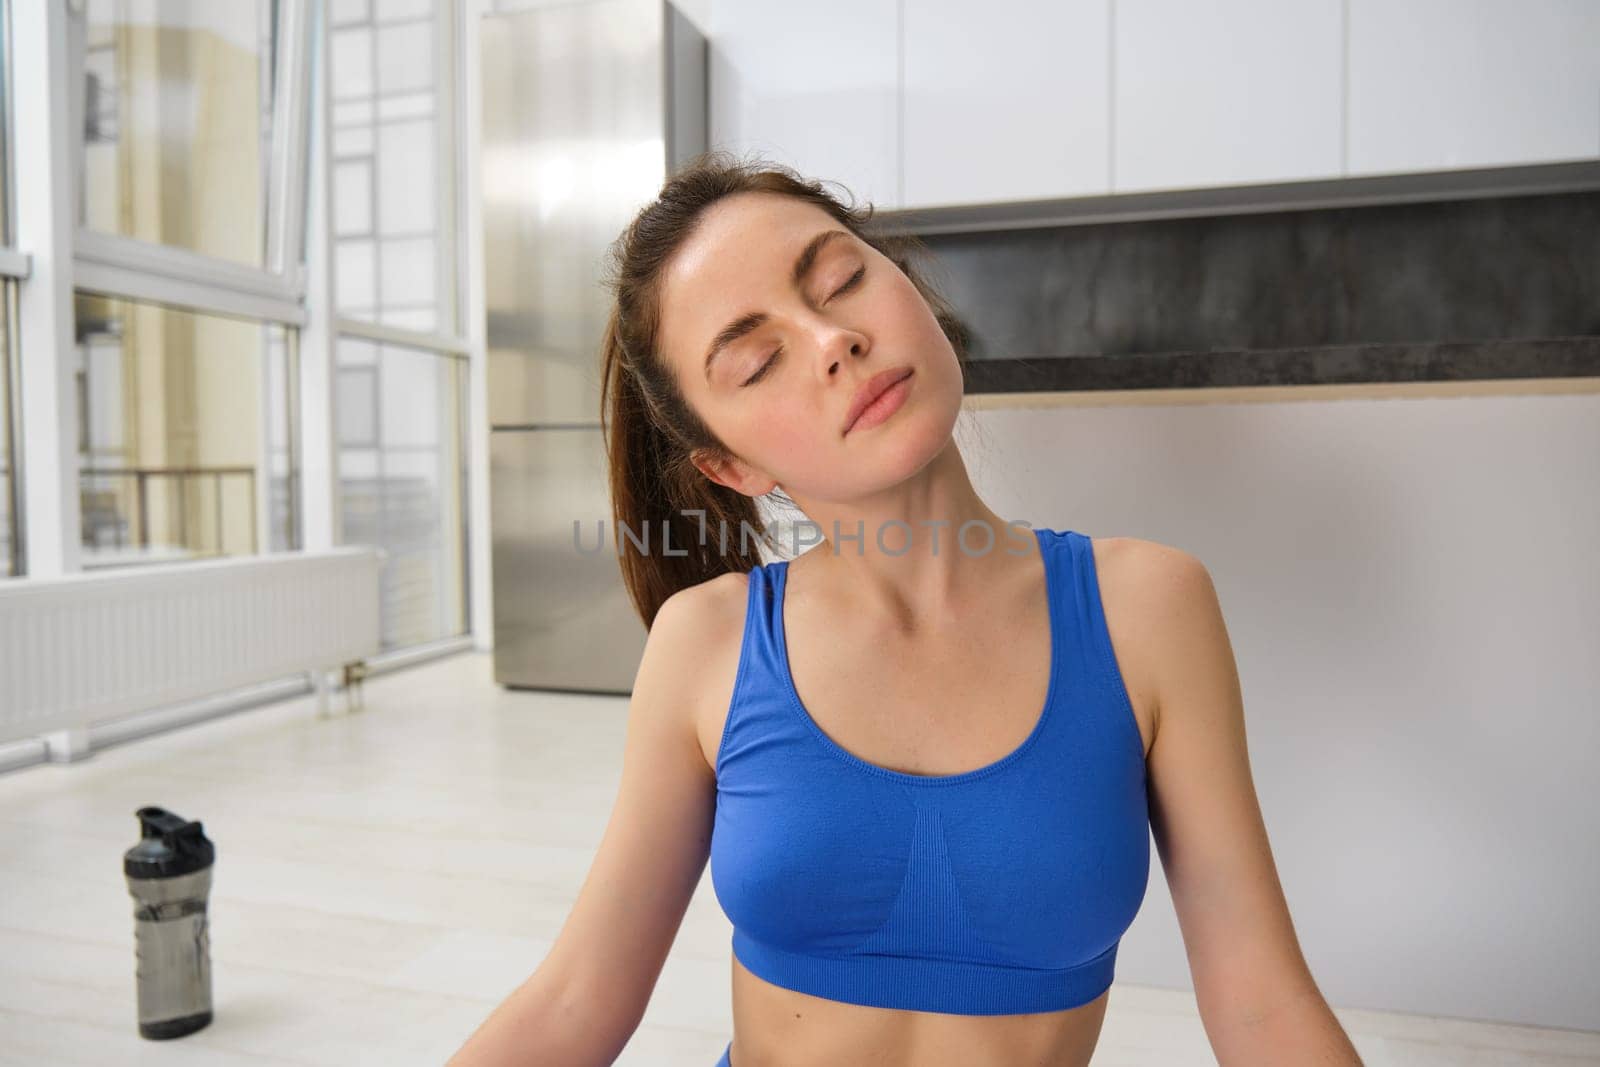 Portrait of young sportswoman, stretching her neck, warm-up before yoga exercises, doing fitness workout on rubber mat, wearing blue sportsbra and leggings.